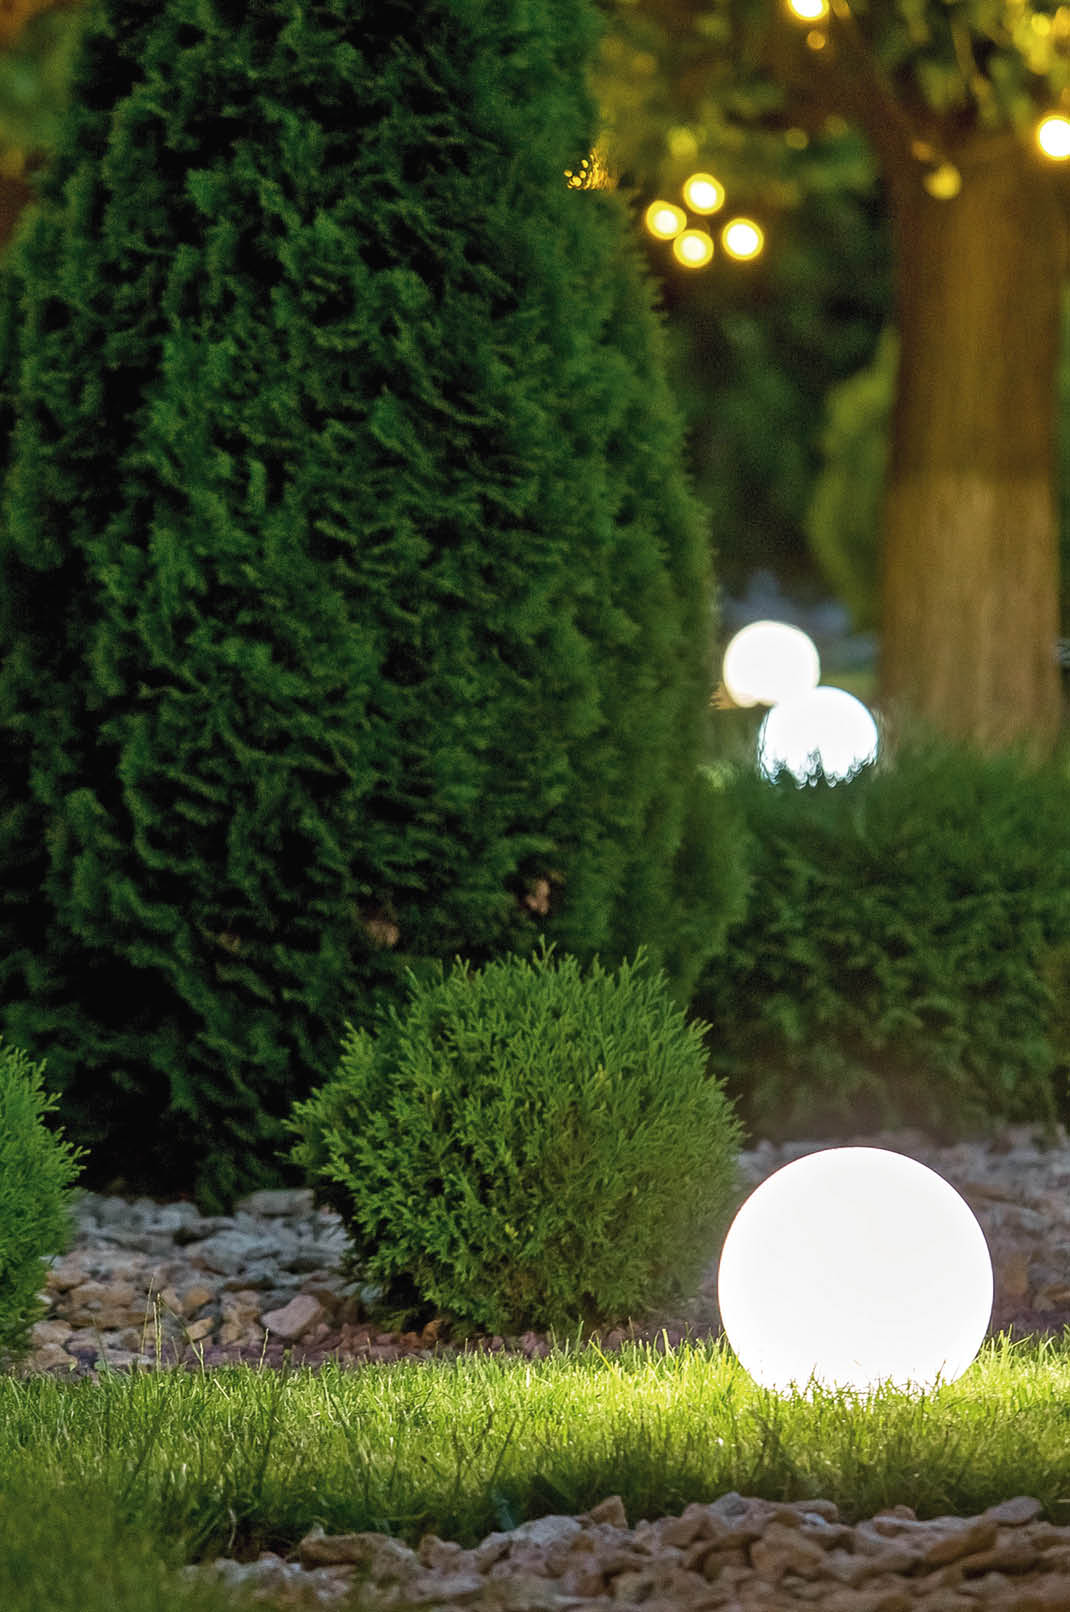 backyard light garden with lantern electric lamp with a round diffuser in the green grass with thuja bushes in a park with landscaping, closeup night scene nobody.